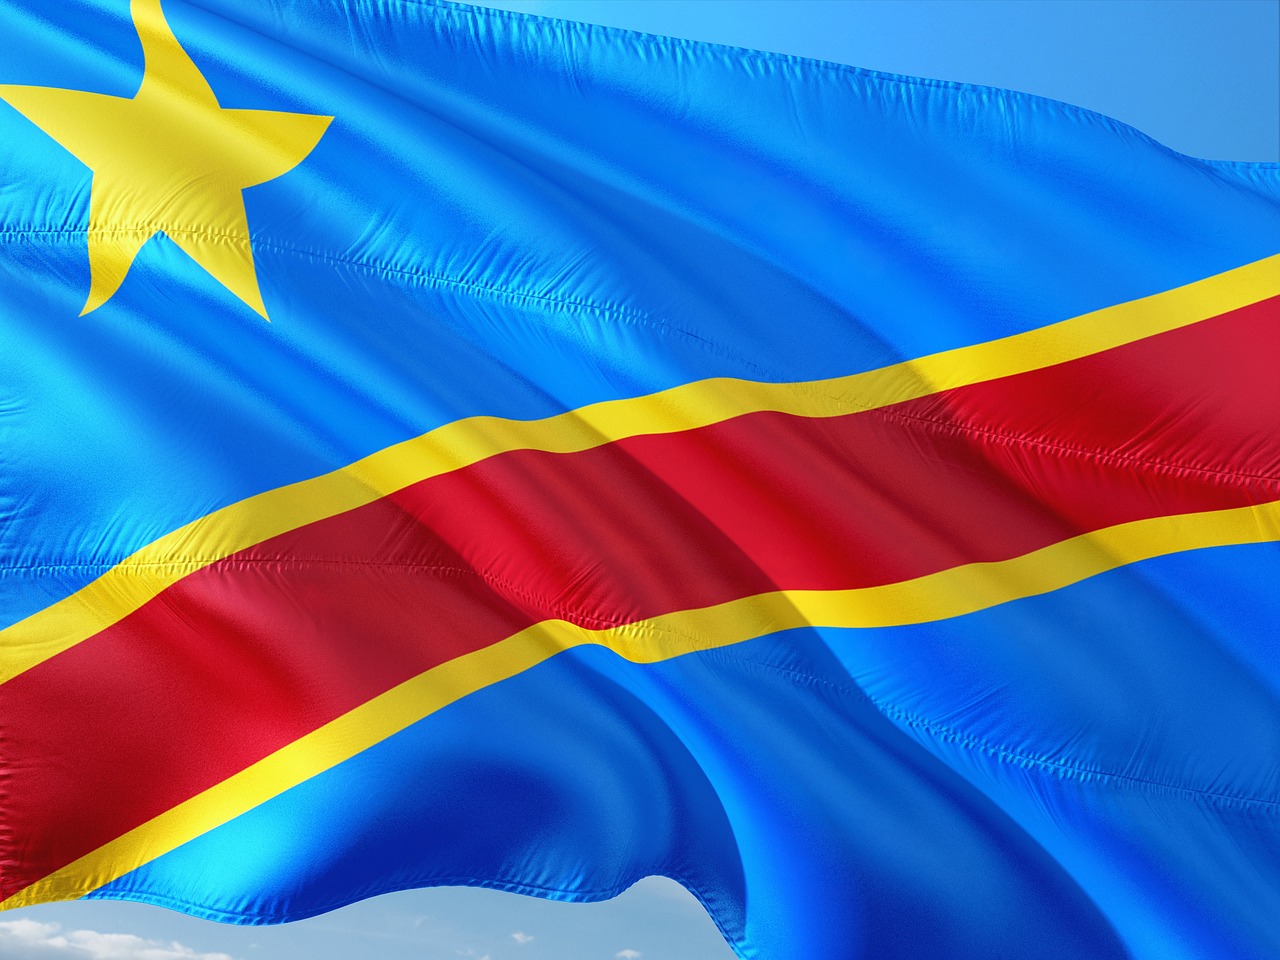 Congo lawmakers introduce bill to restrict presidential candidate eligibility requirements